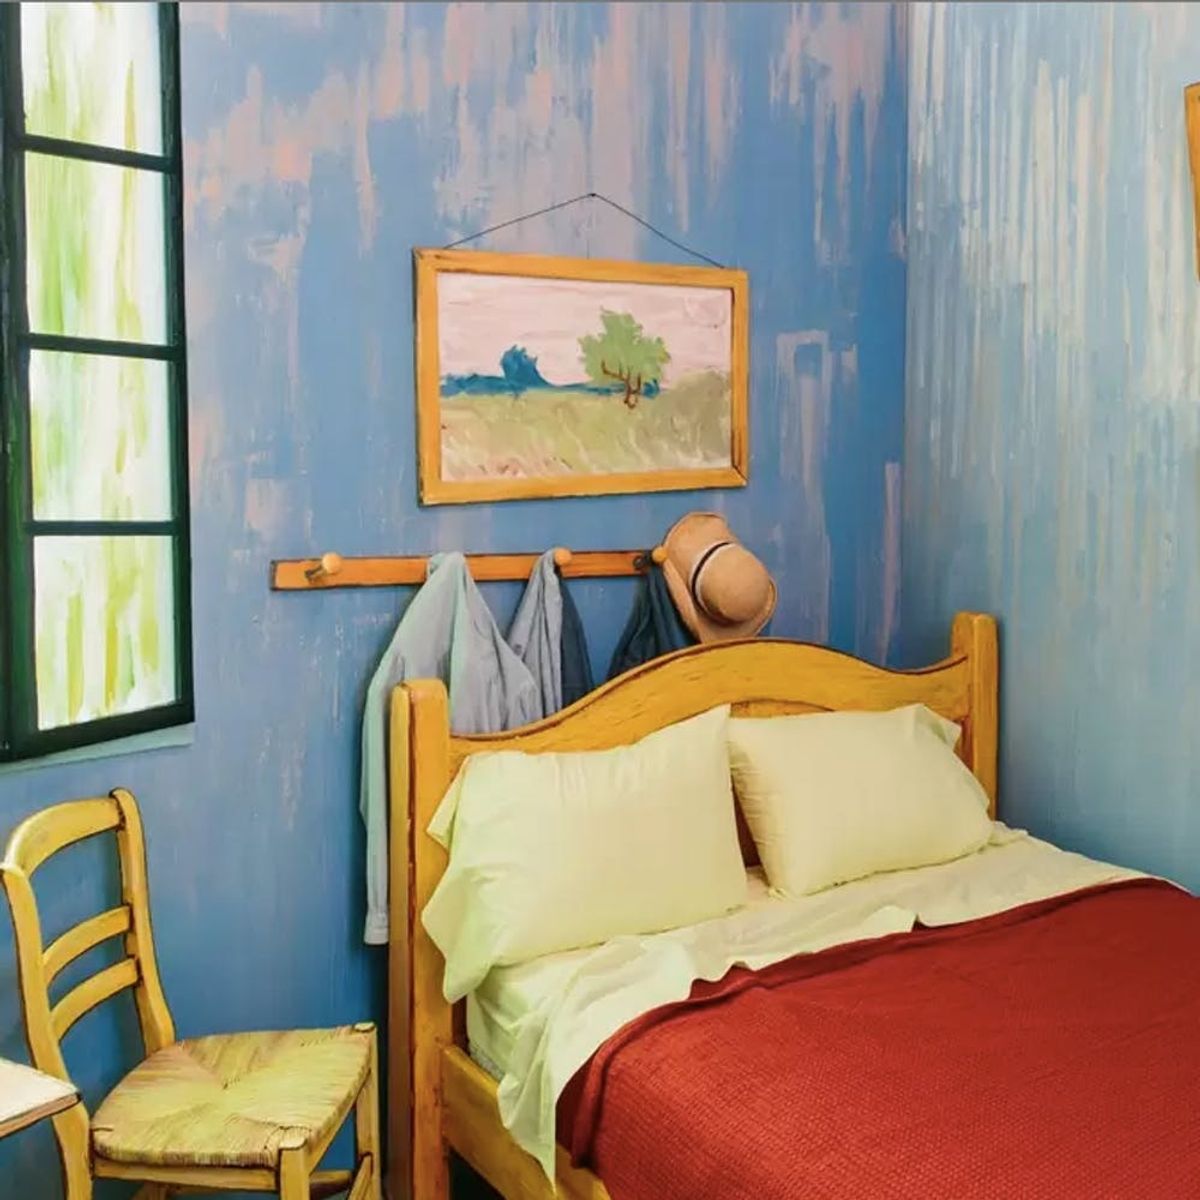 You Can Airbnb This Bedroom Replica of a Van Gogh Painting